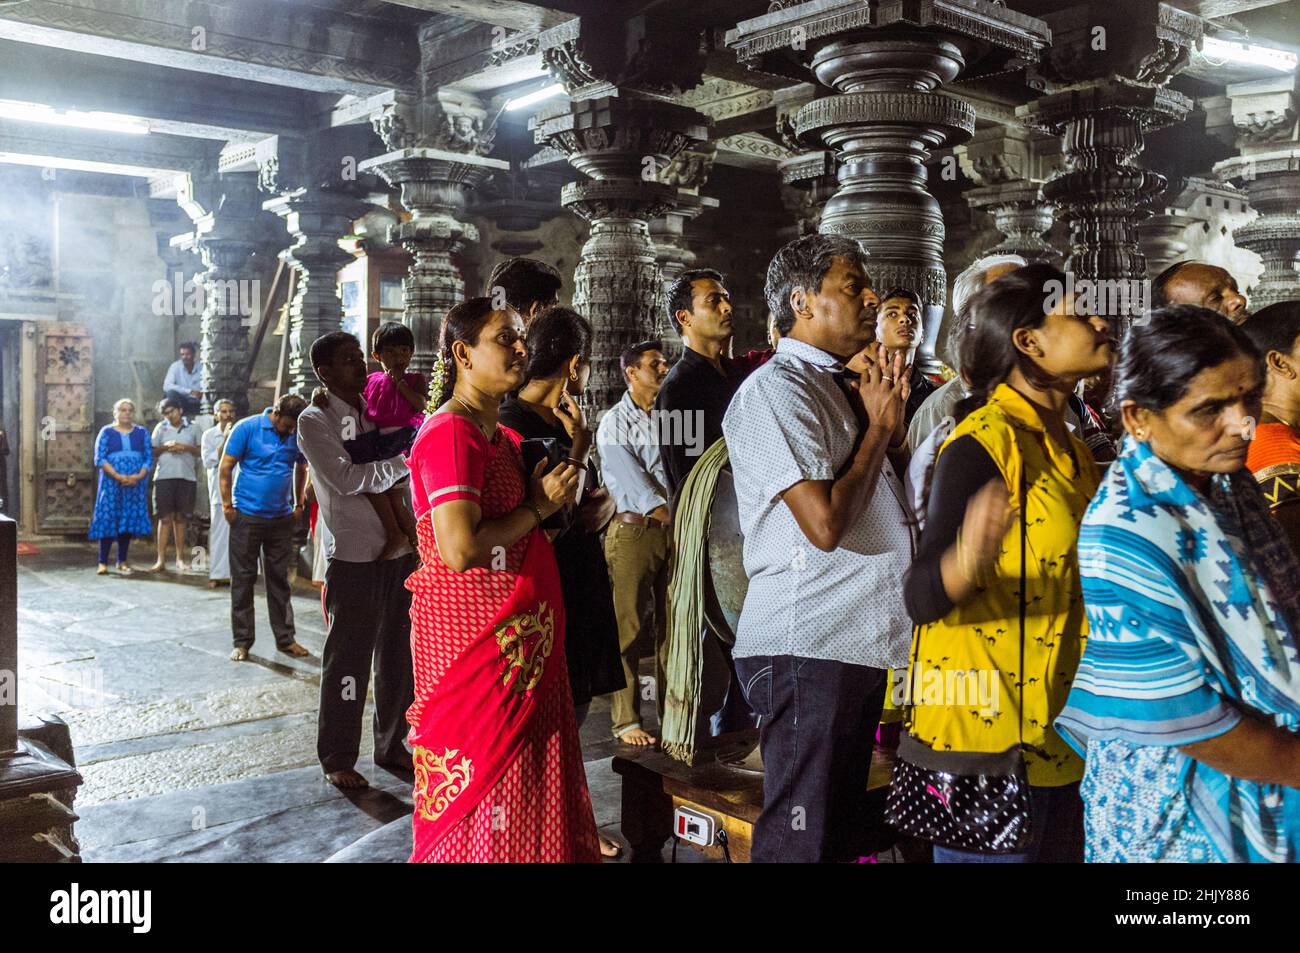 Belur, Karnataka, India : A group of devotees stand on prayer inside the 12th century Channakeshava Temple before the ritual puja ceremony. Stock Photo